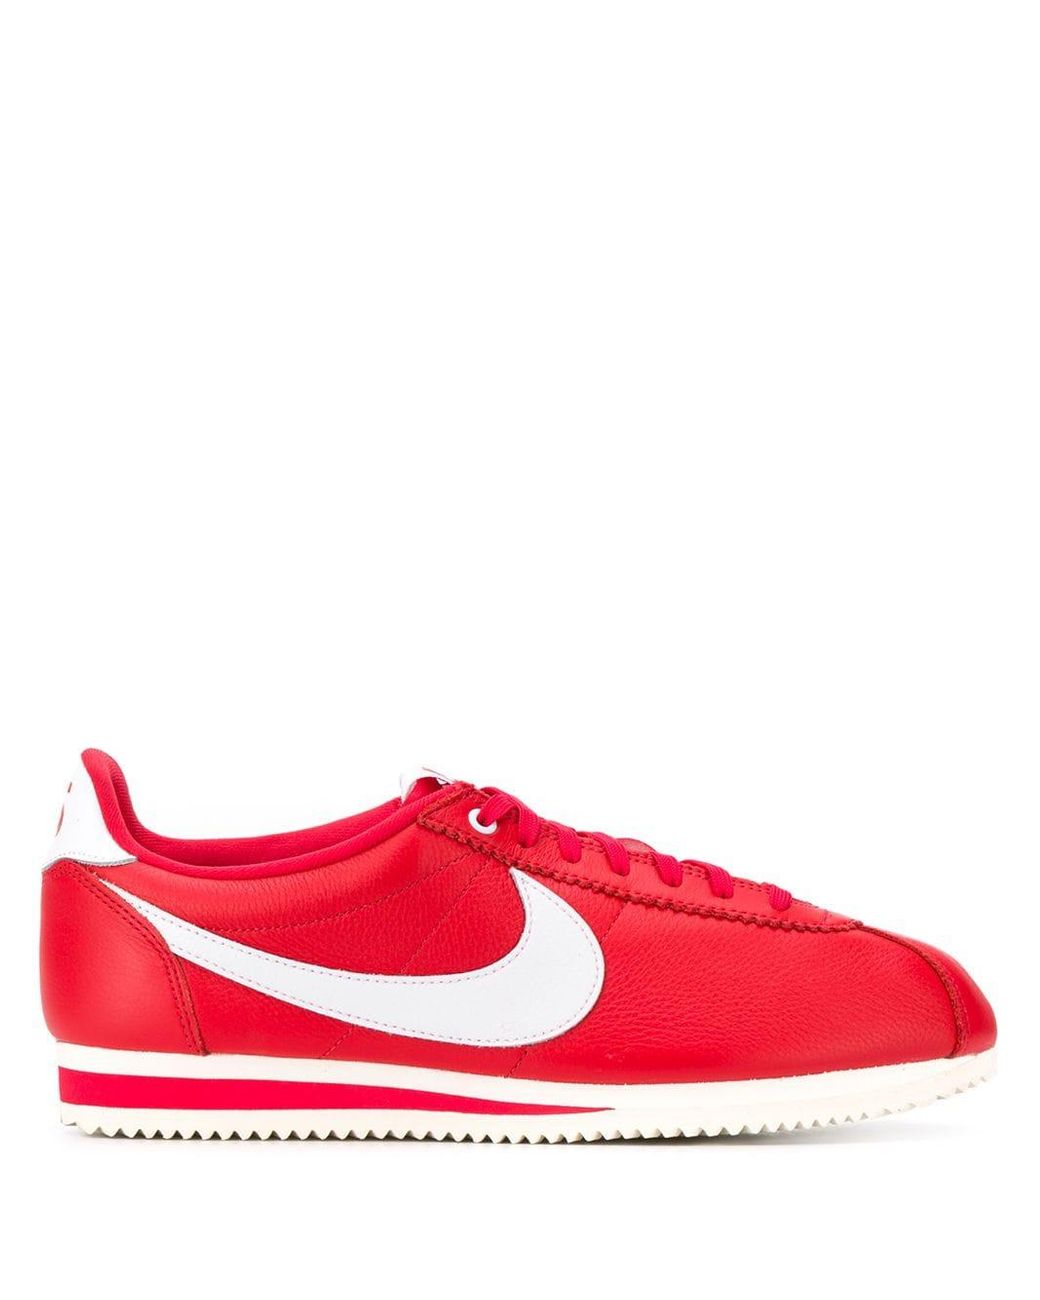 Nike Leather X Stranger Things Cortez (4th Of July) Shoe in Red/White (Red)  for Men - Save 77% | Lyst